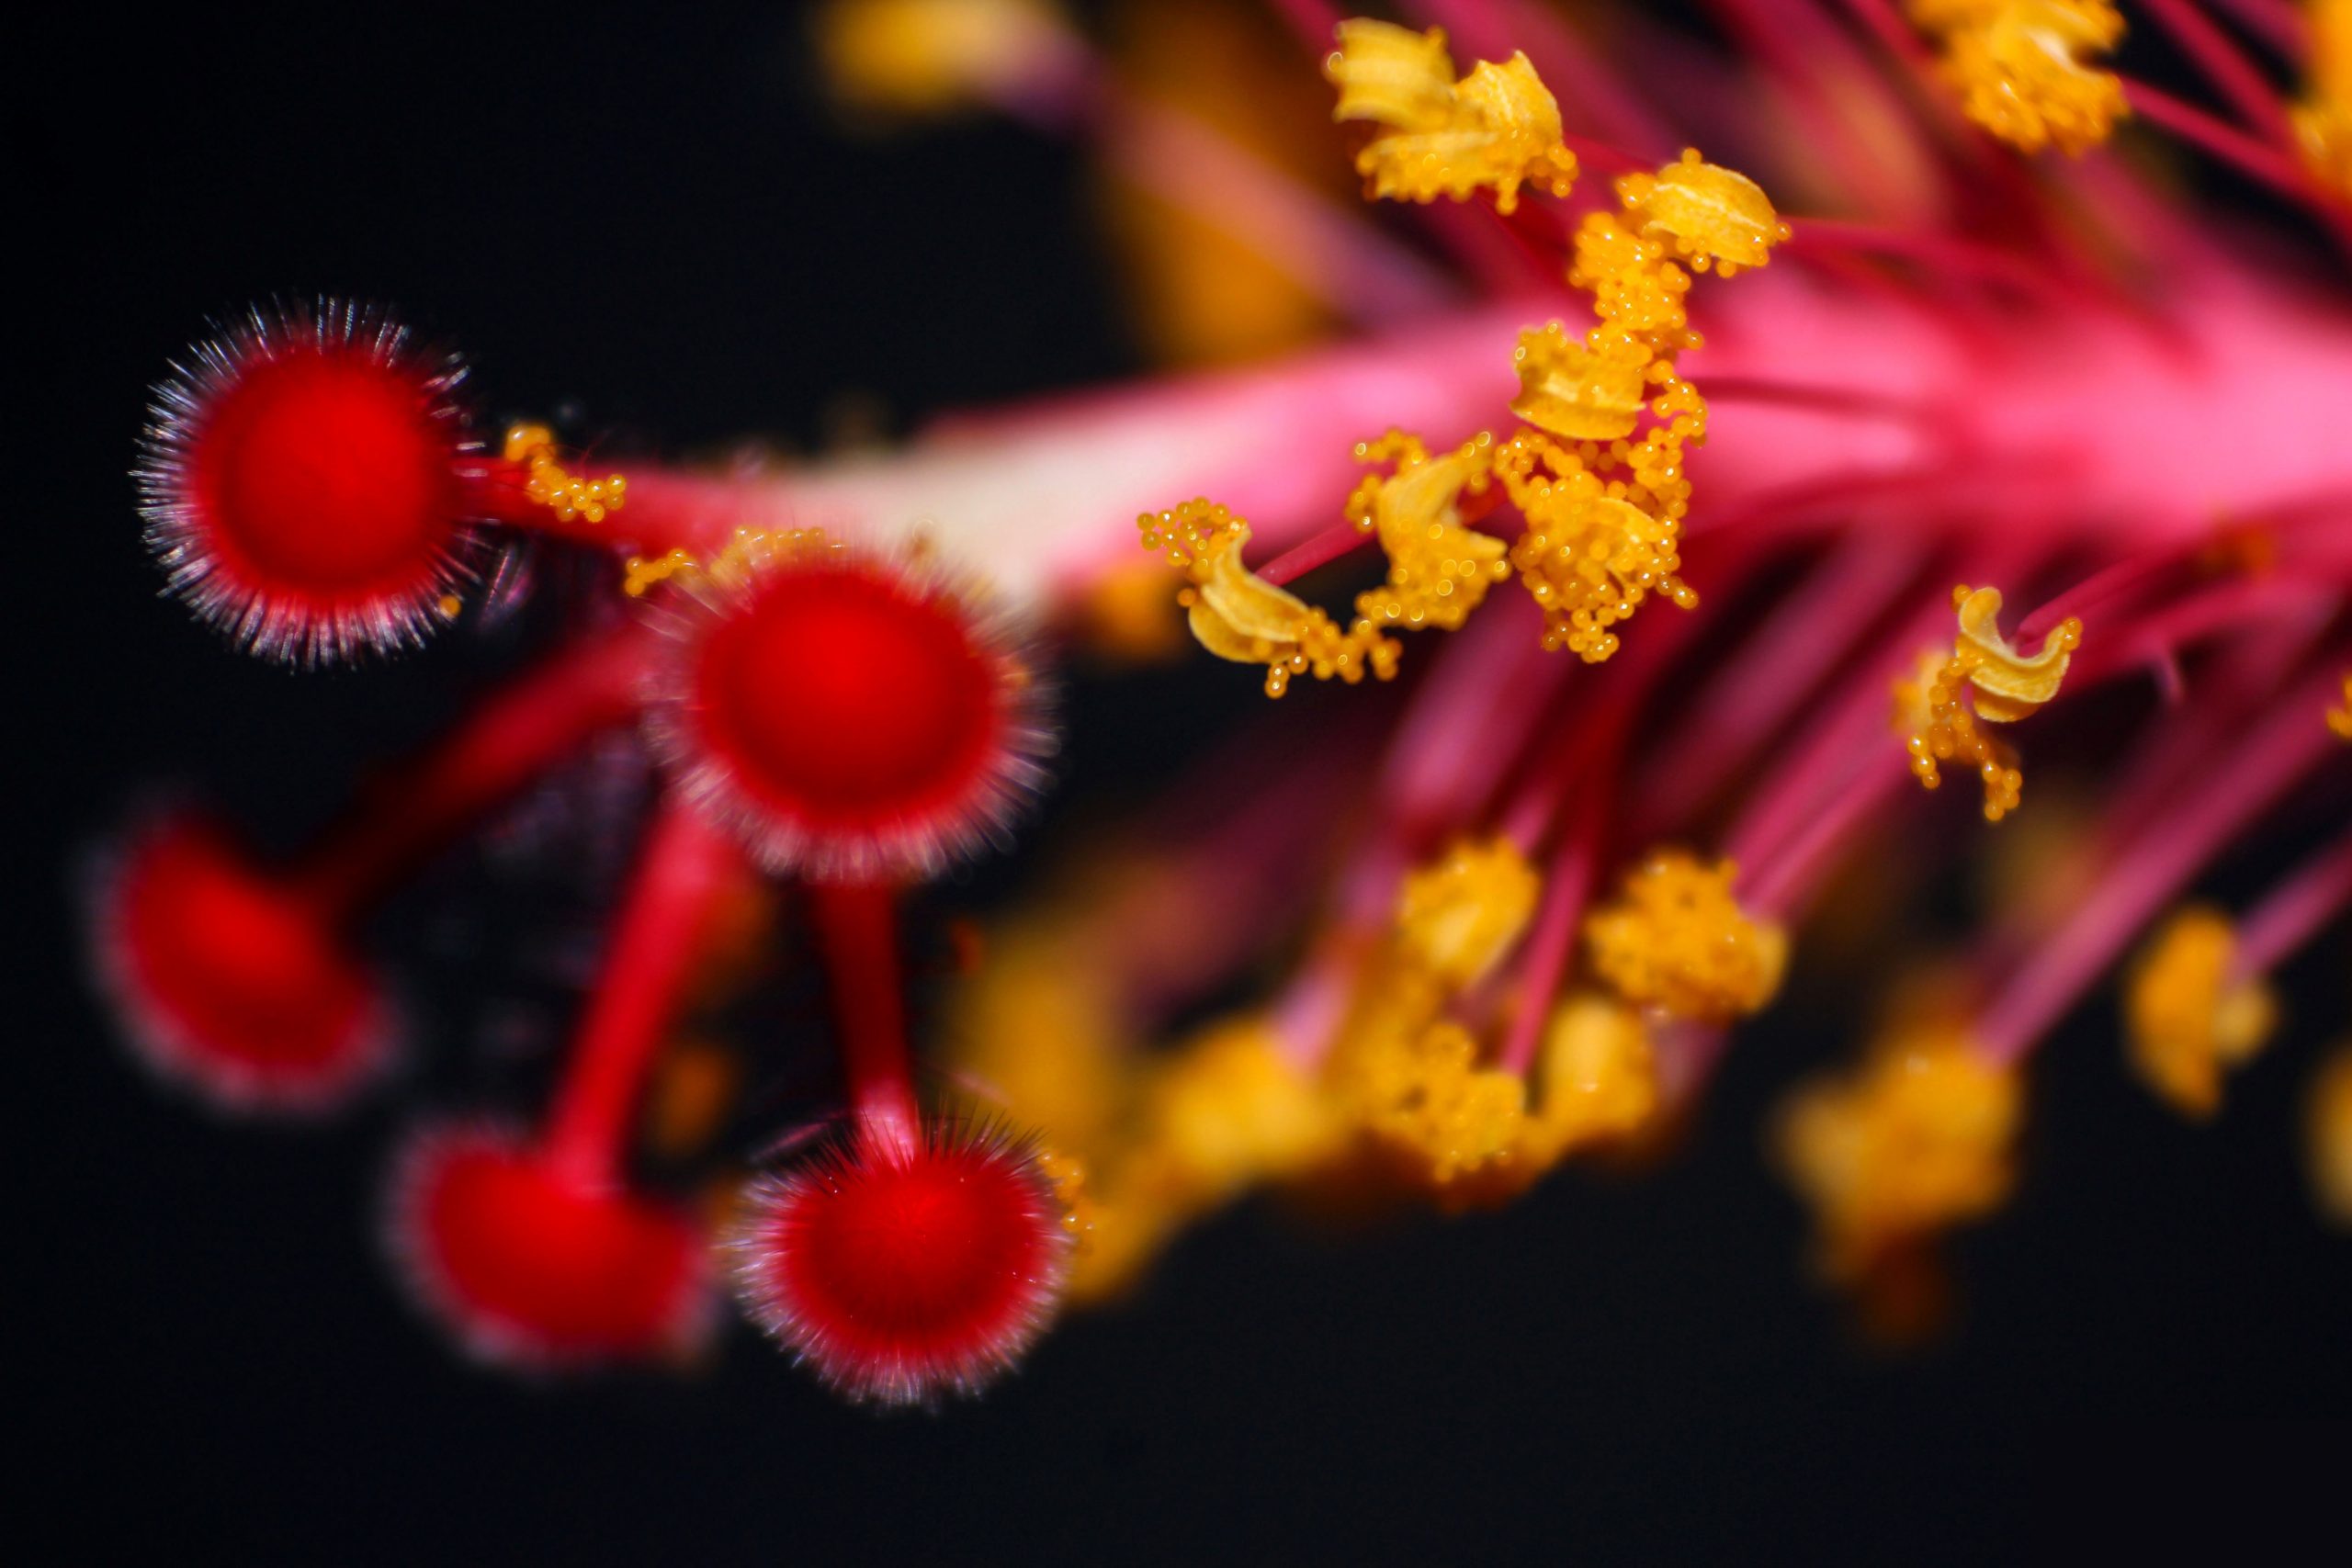 Macro view of a flower